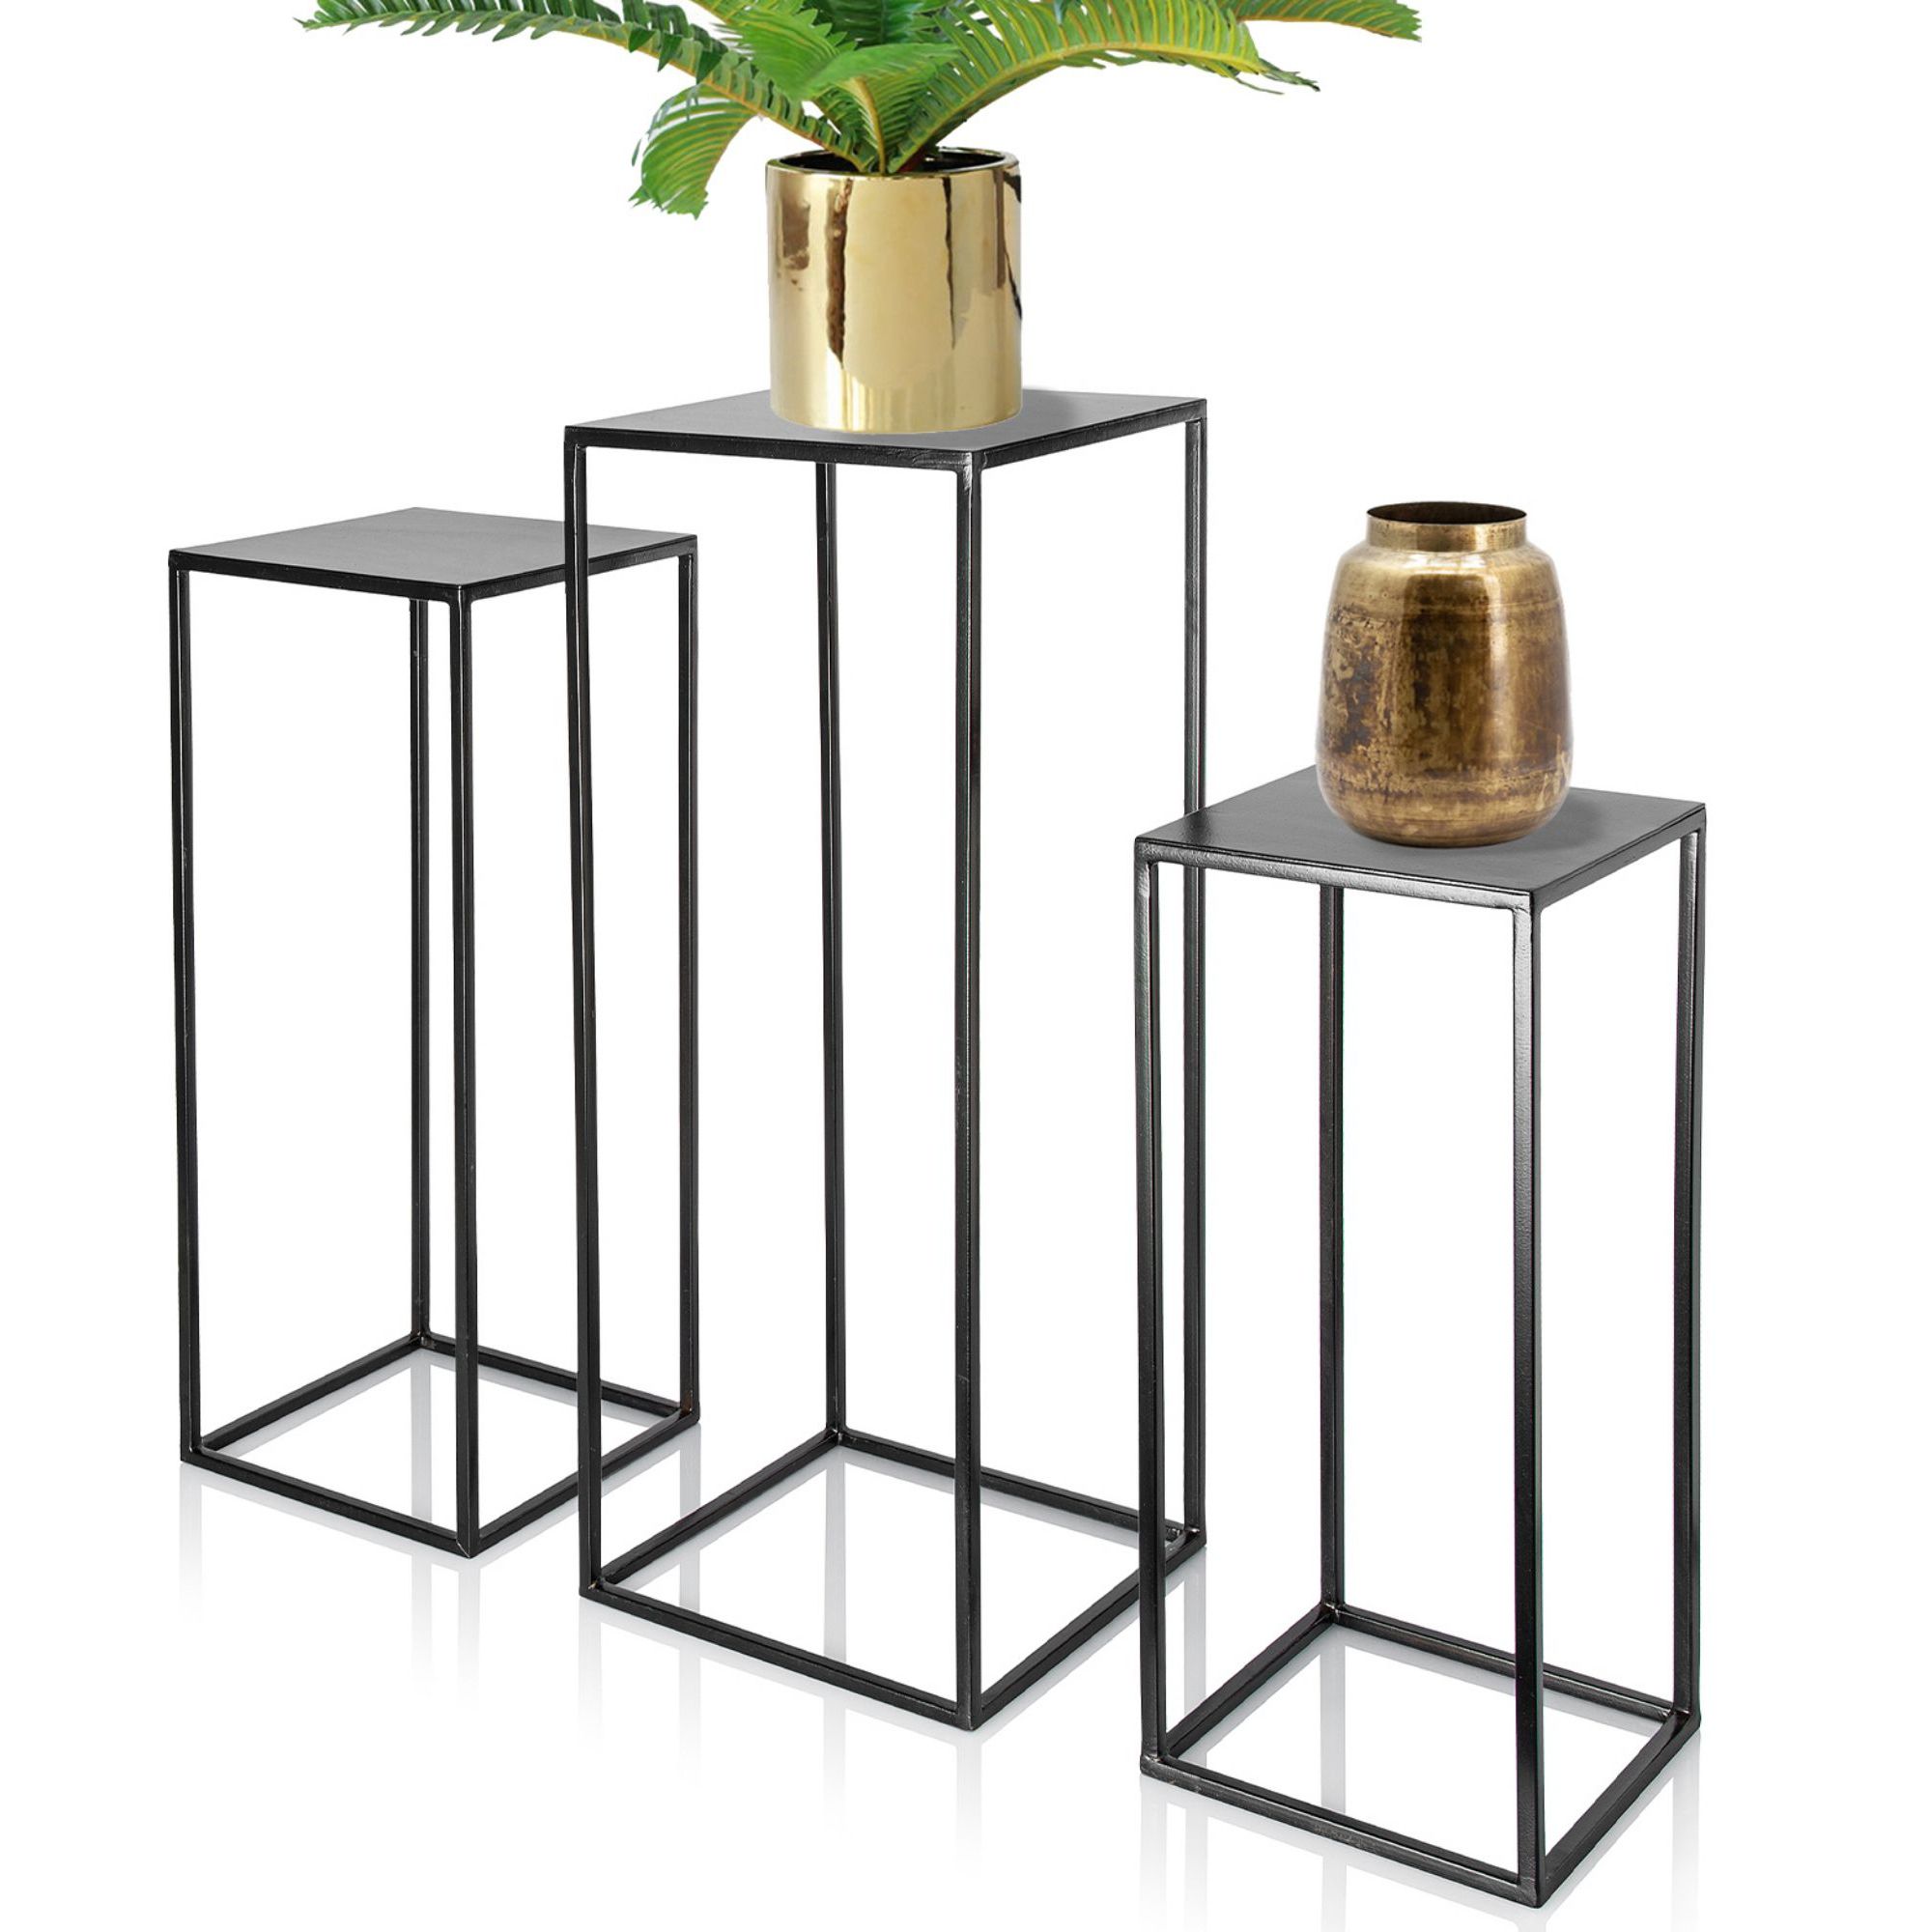 Most Up To Date Square Plant Stands Regarding Trio Metal Plant Stand With High Square Rack Flower Holder (View 2 of 10)